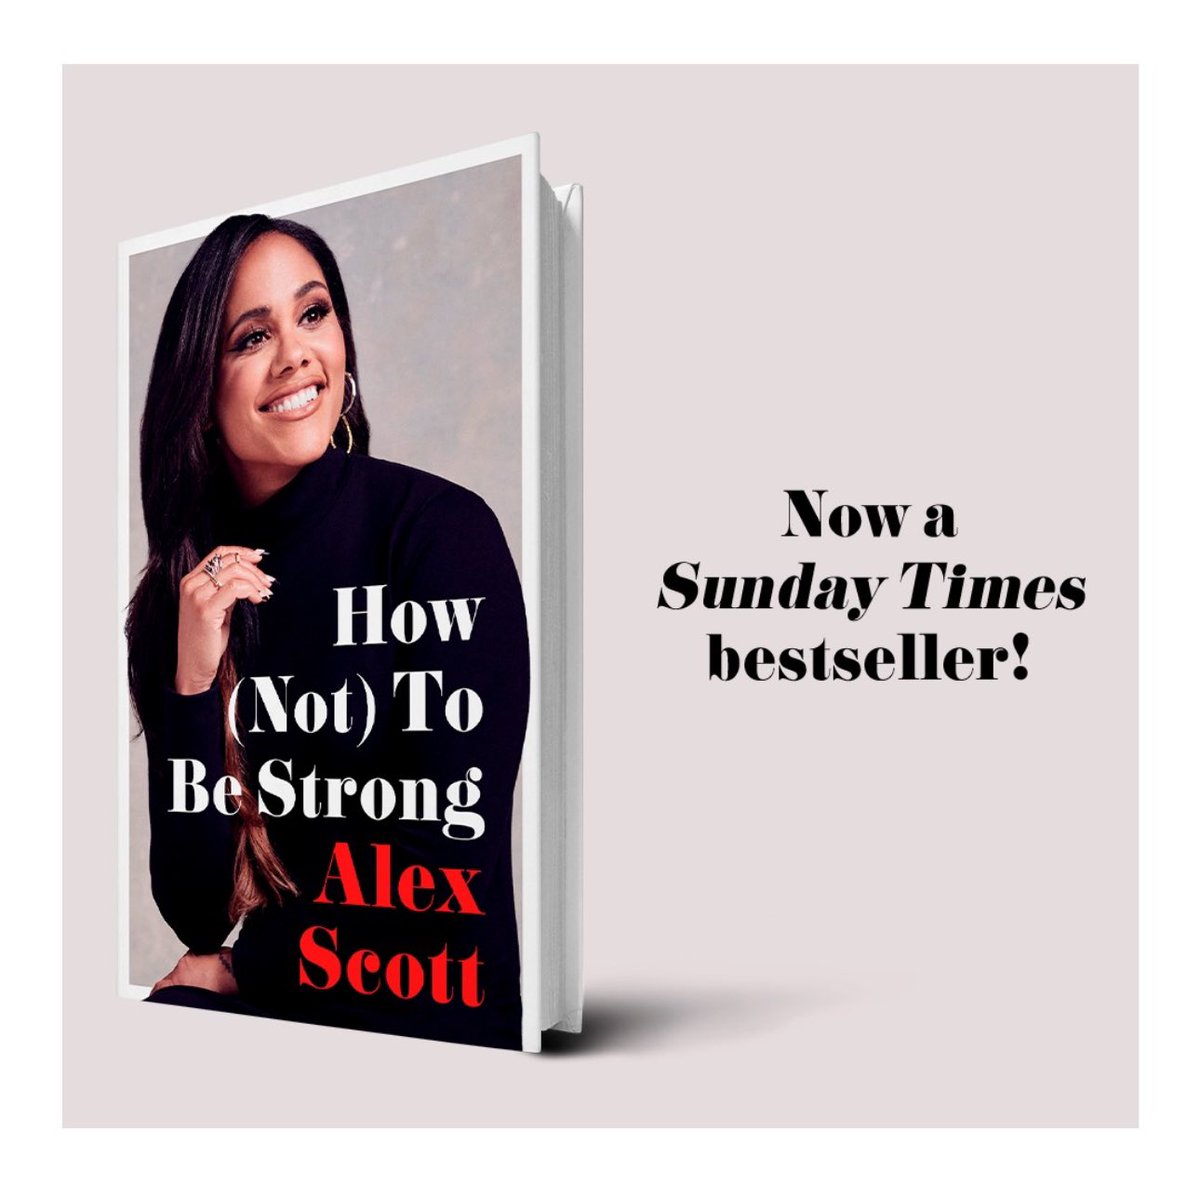 I don’t have a podcast to promote or the need to try use a platform like this to bully and belittle others I do have a sunday times bestseller that’s still available however, with all proceeds going straight to @RefugeCharity #staywinning 💁🏽‍♀️